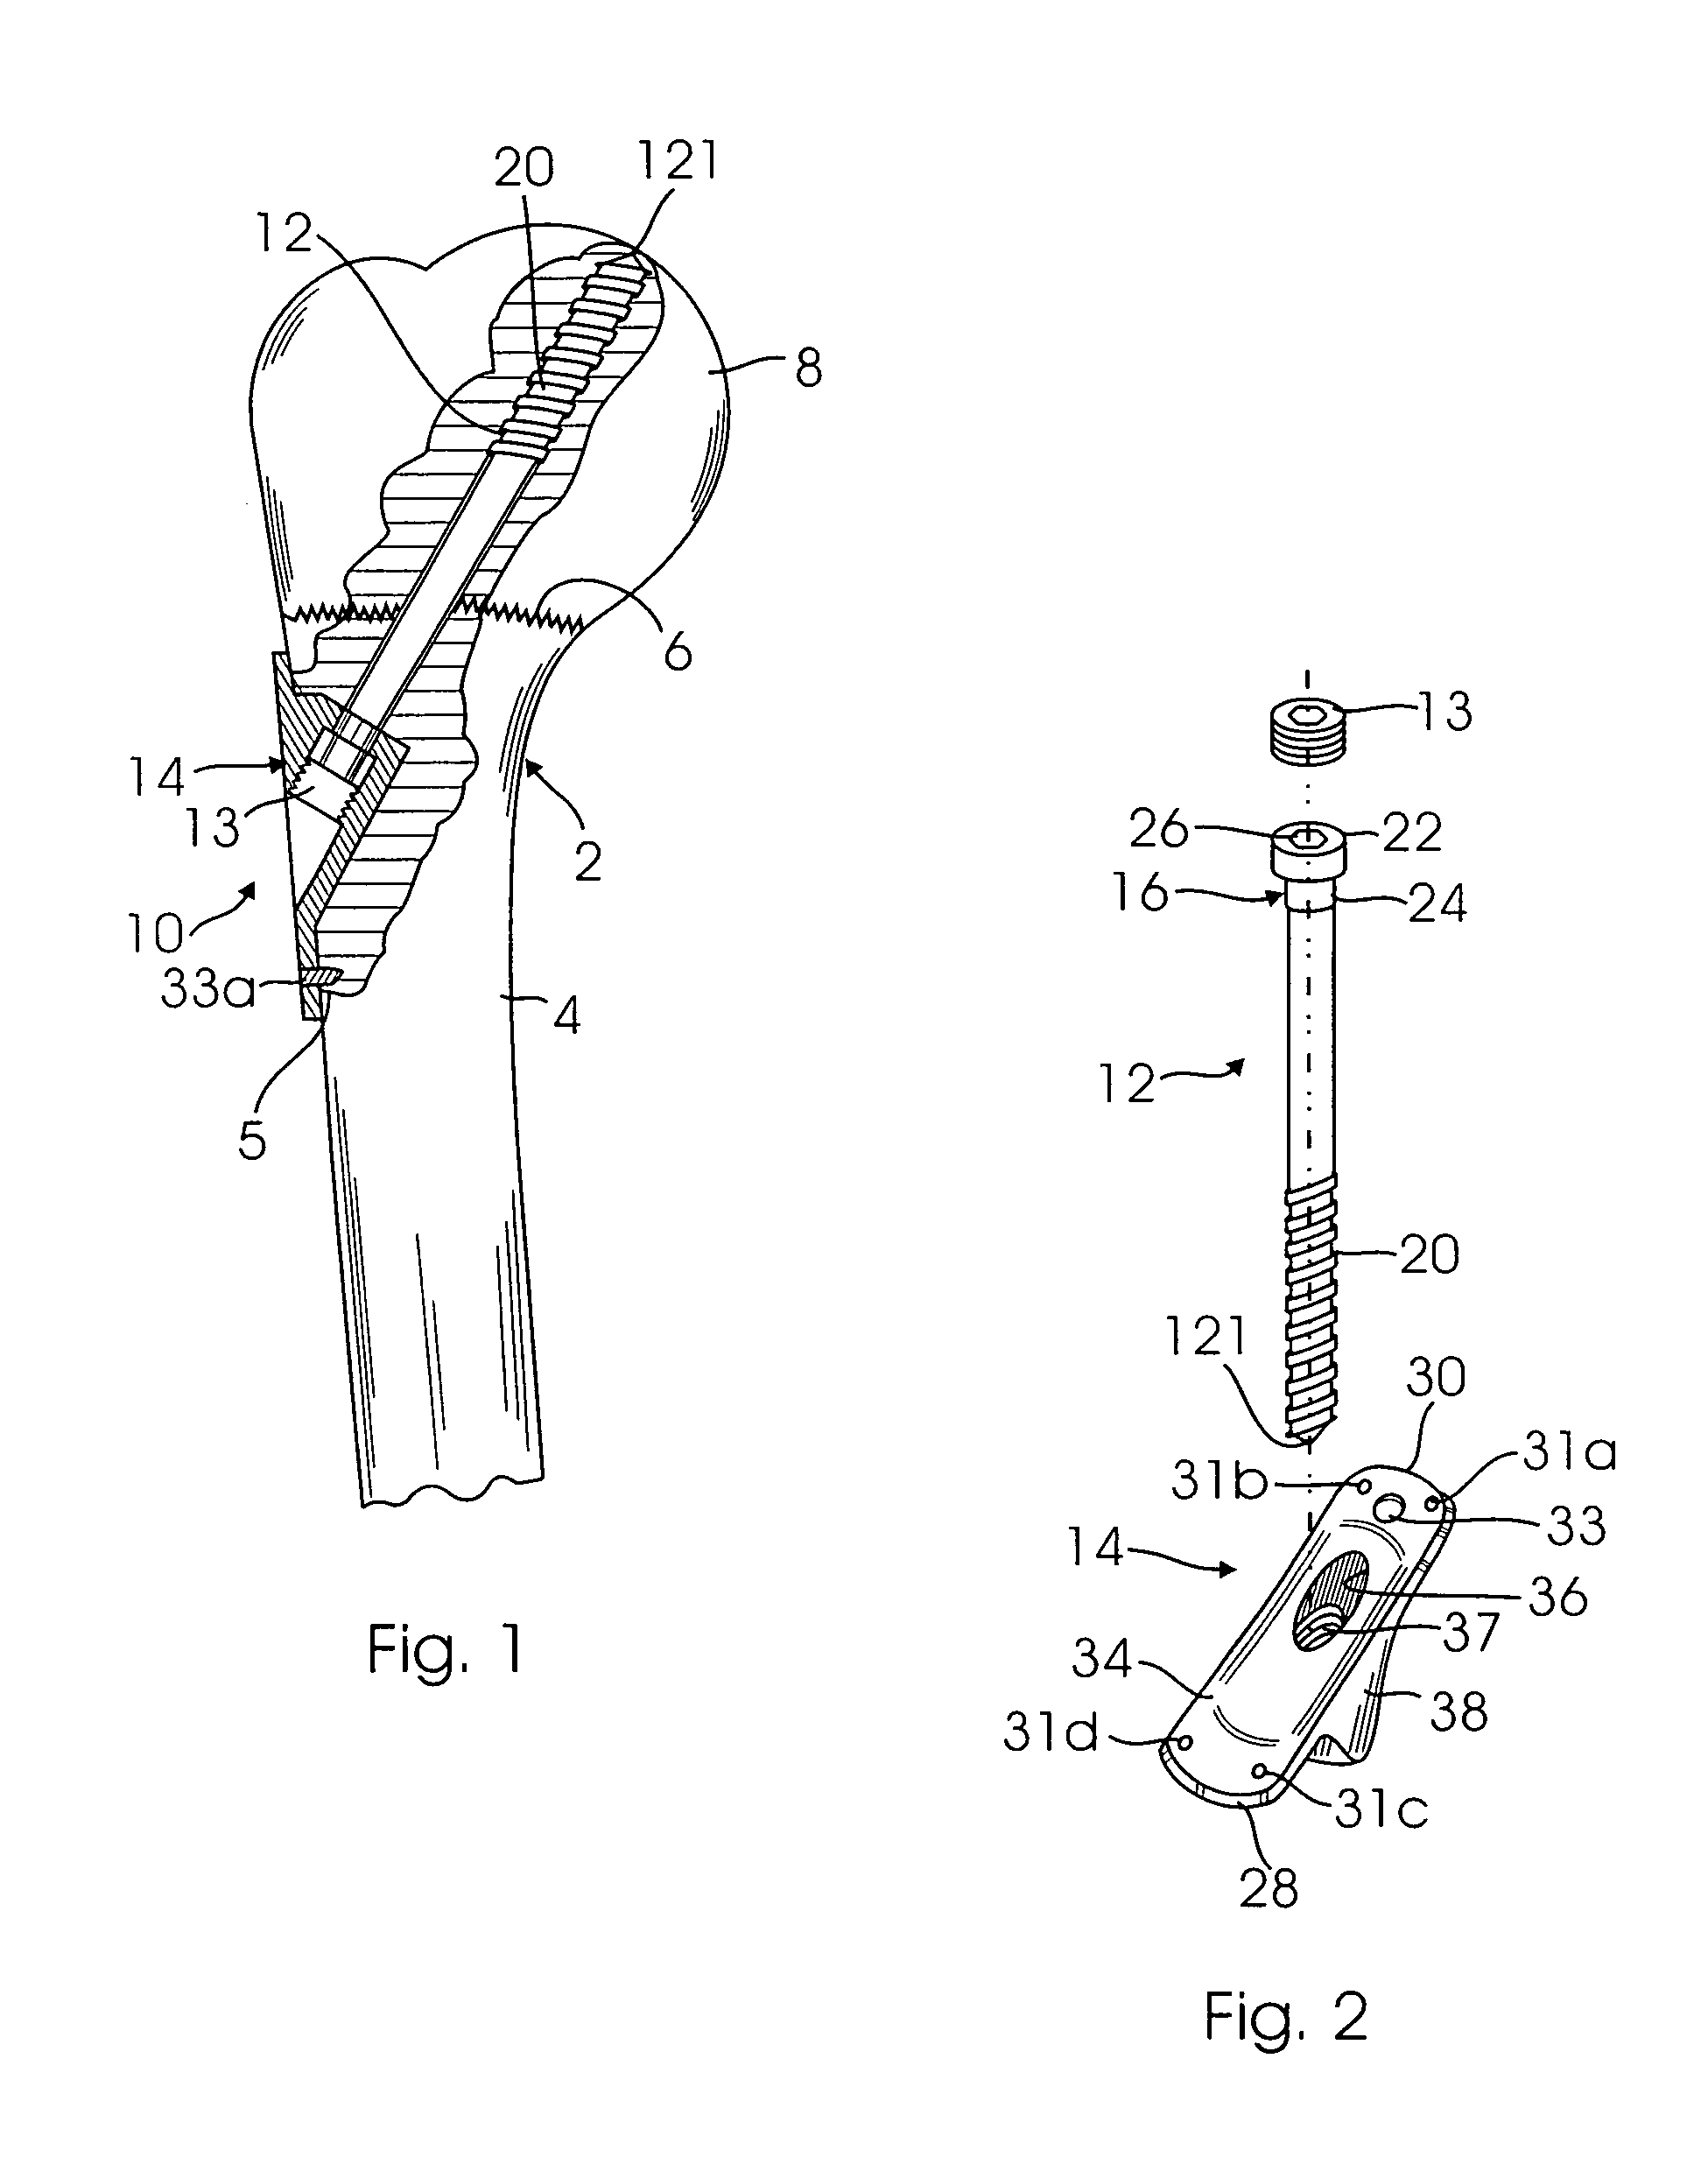 Odd angle internal bone fixation device for use in a transverse fracture of a humerus